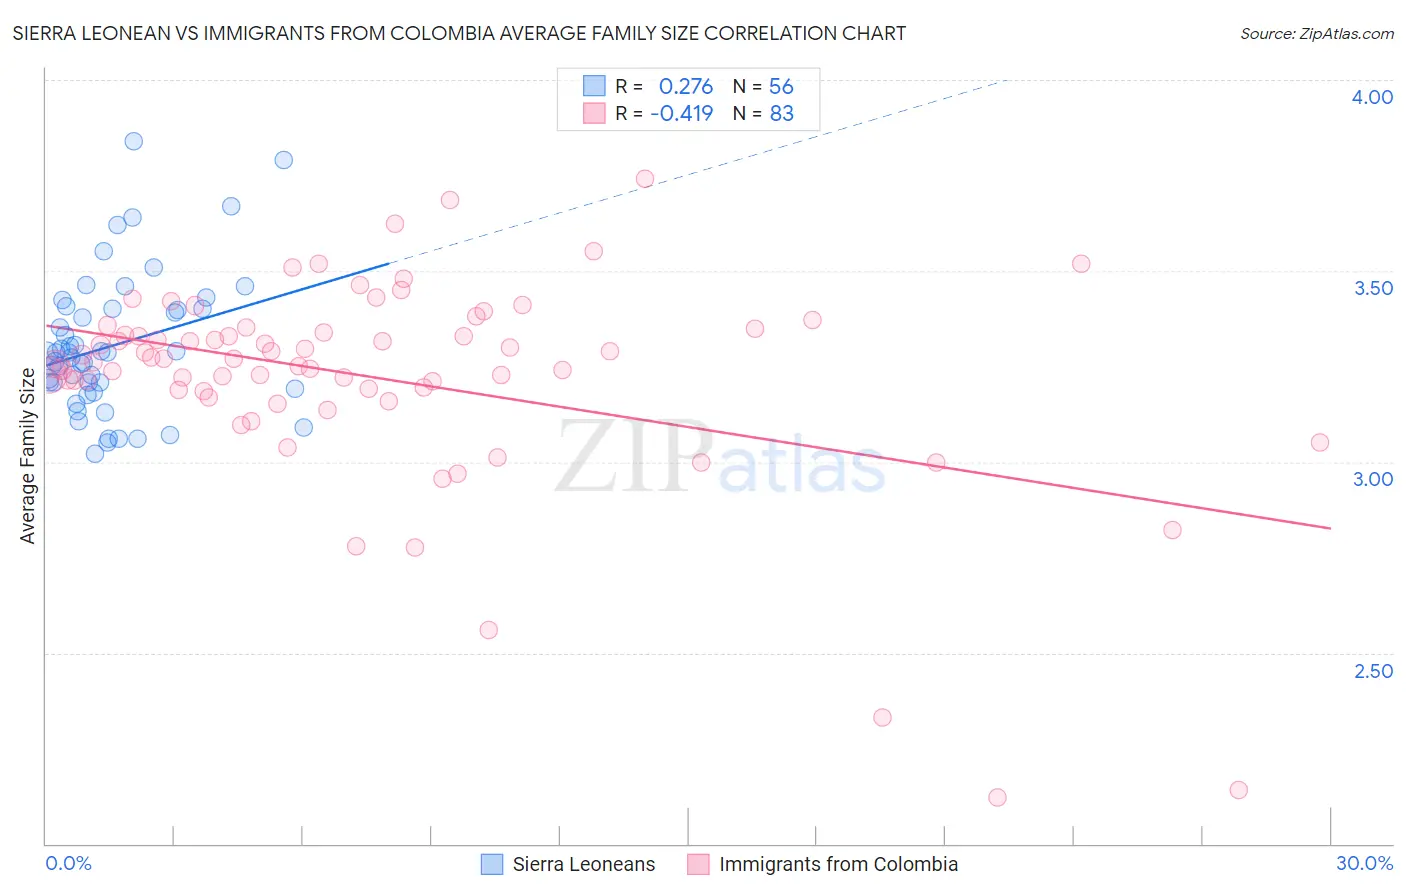 Sierra Leonean vs Immigrants from Colombia Average Family Size